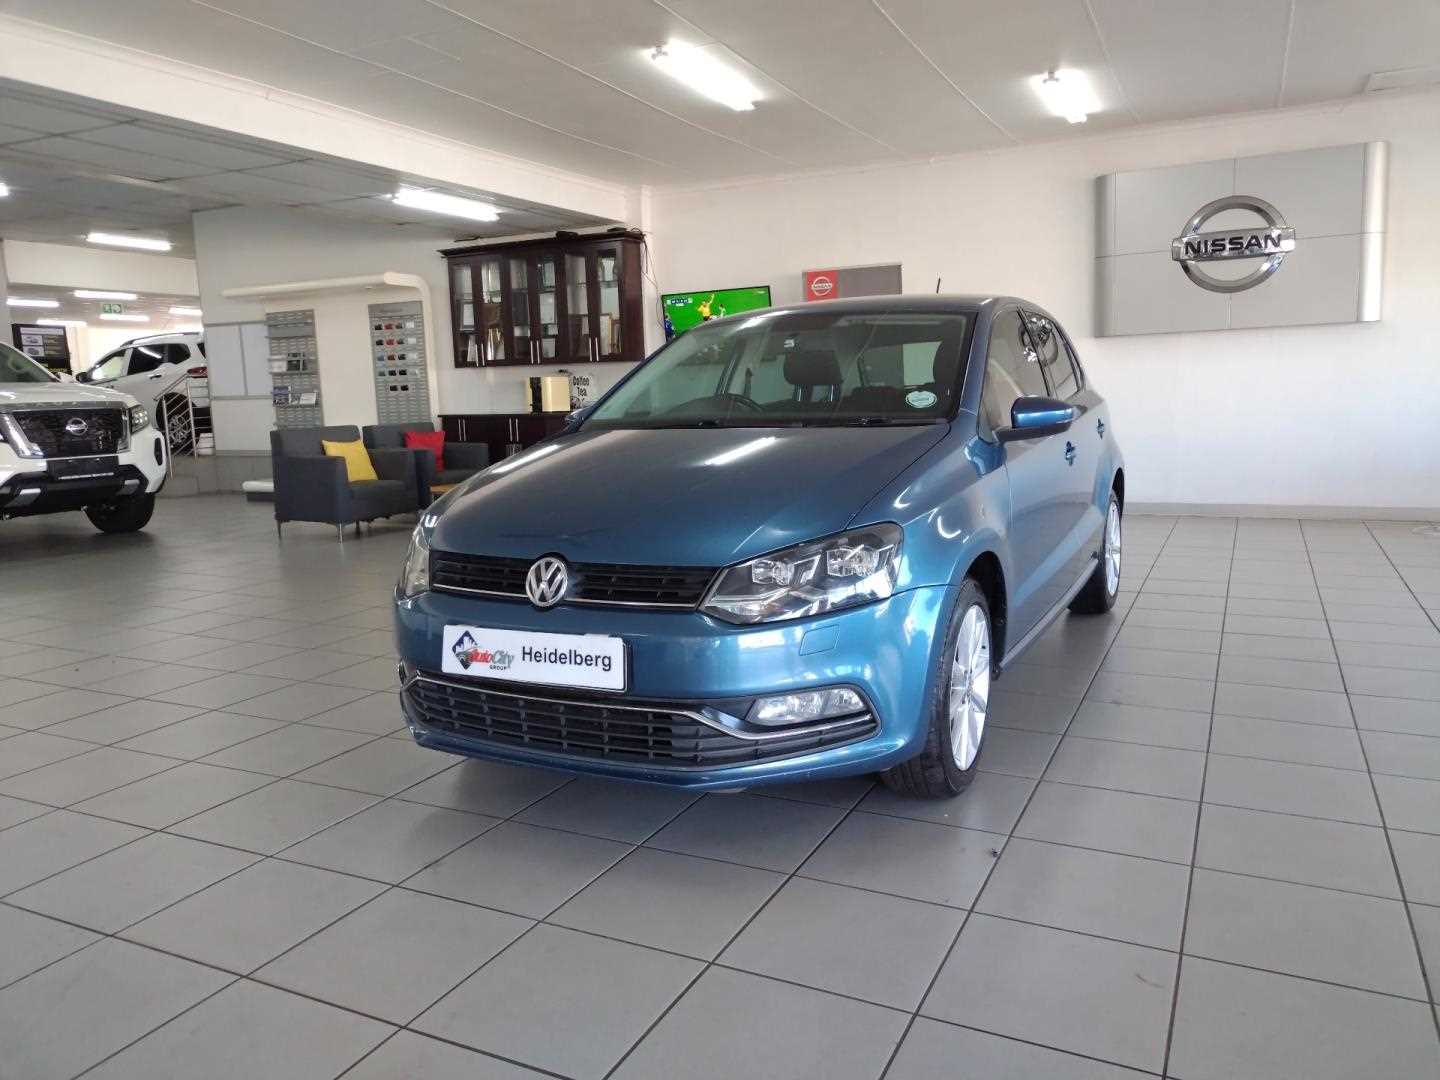 Volkswagen POLO GP 1.2 TSI HIGHLINE DSG (81KW) for Sale in South Africa